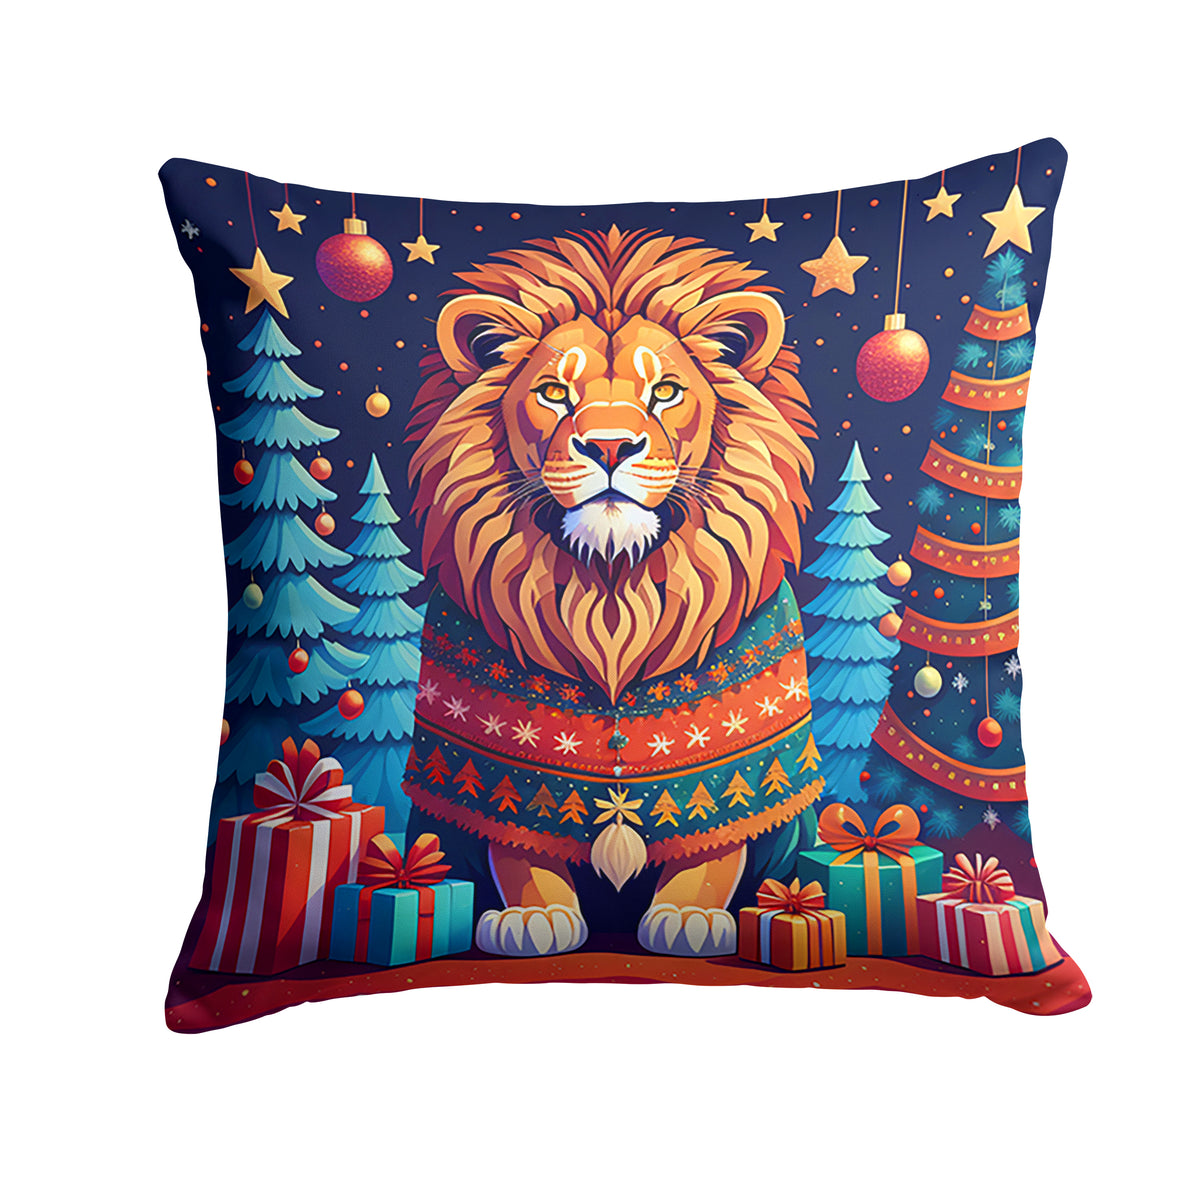 Buy this Lion Christmas Fabric Decorative Pillow